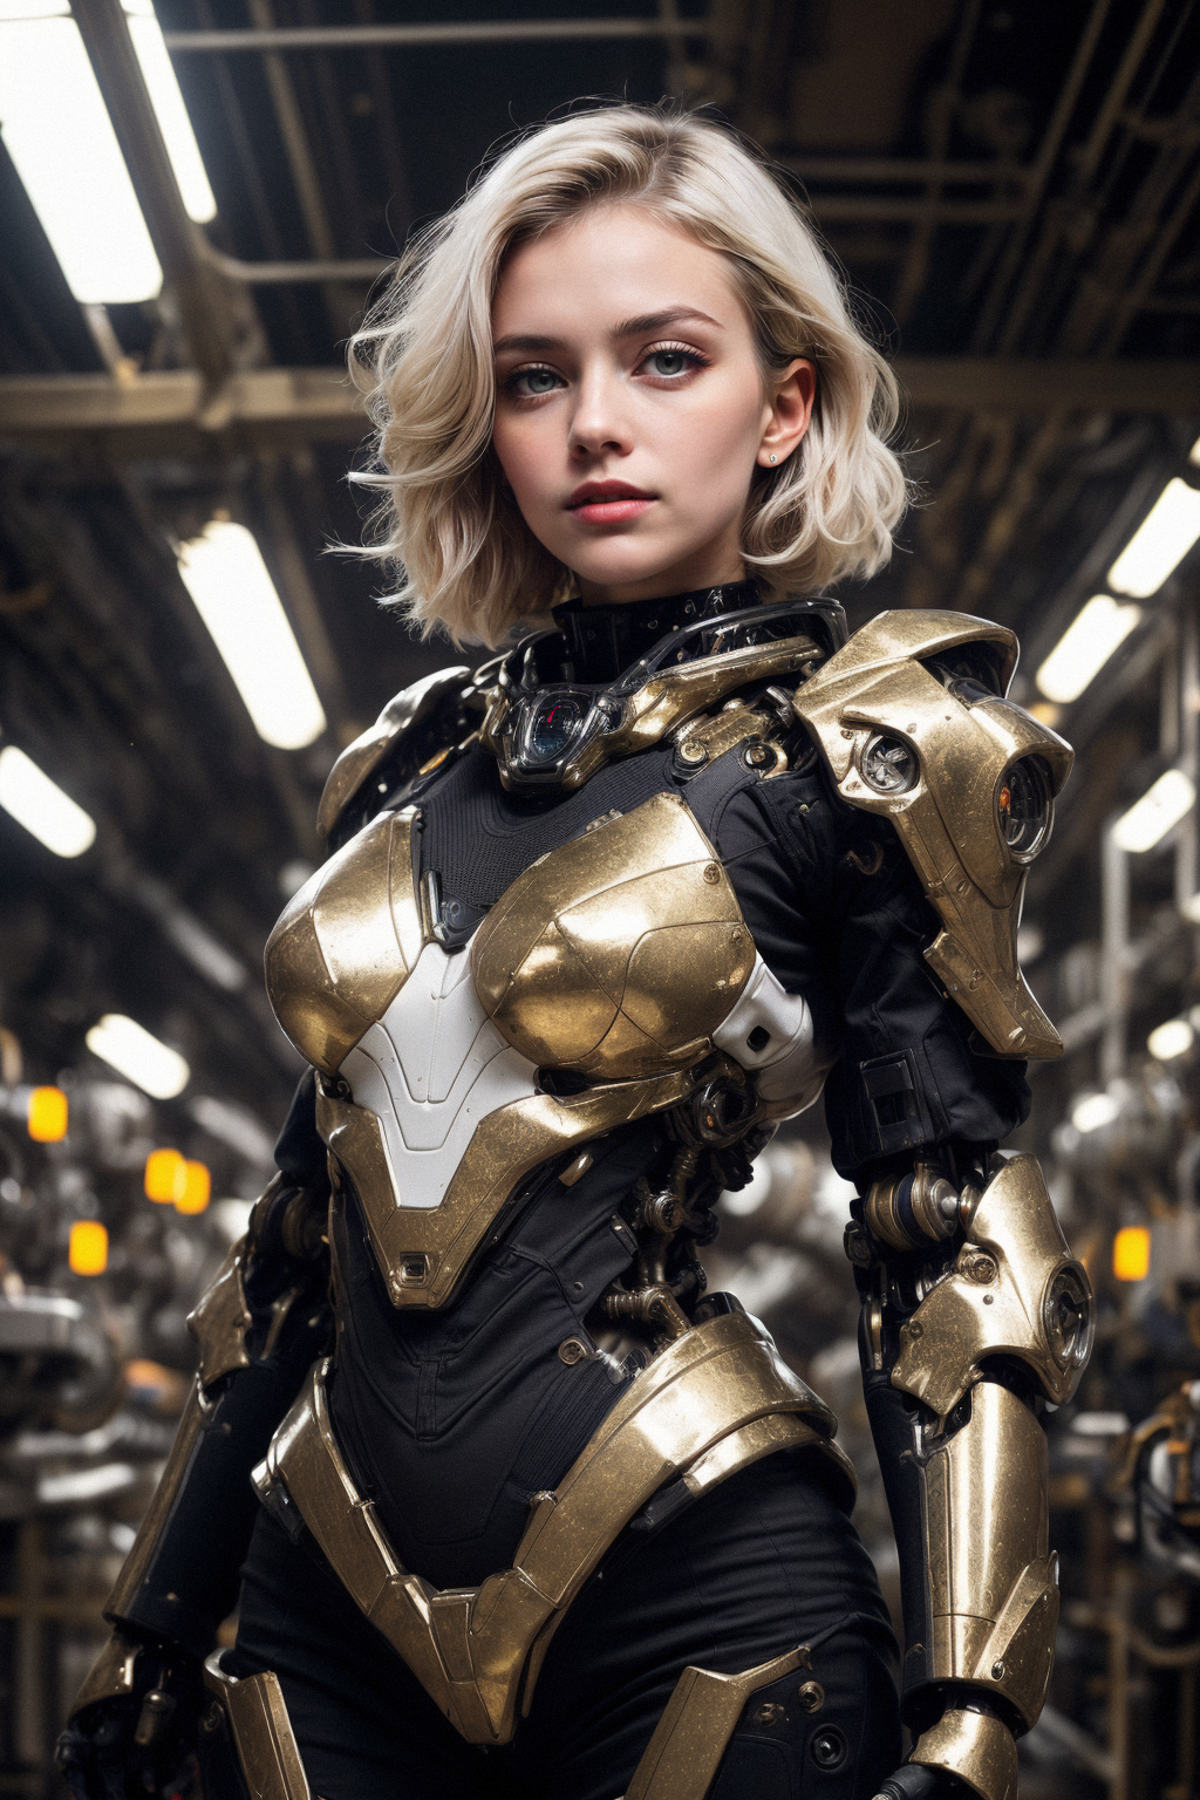 A young woman in a futuristic suit poses in a factory setting.